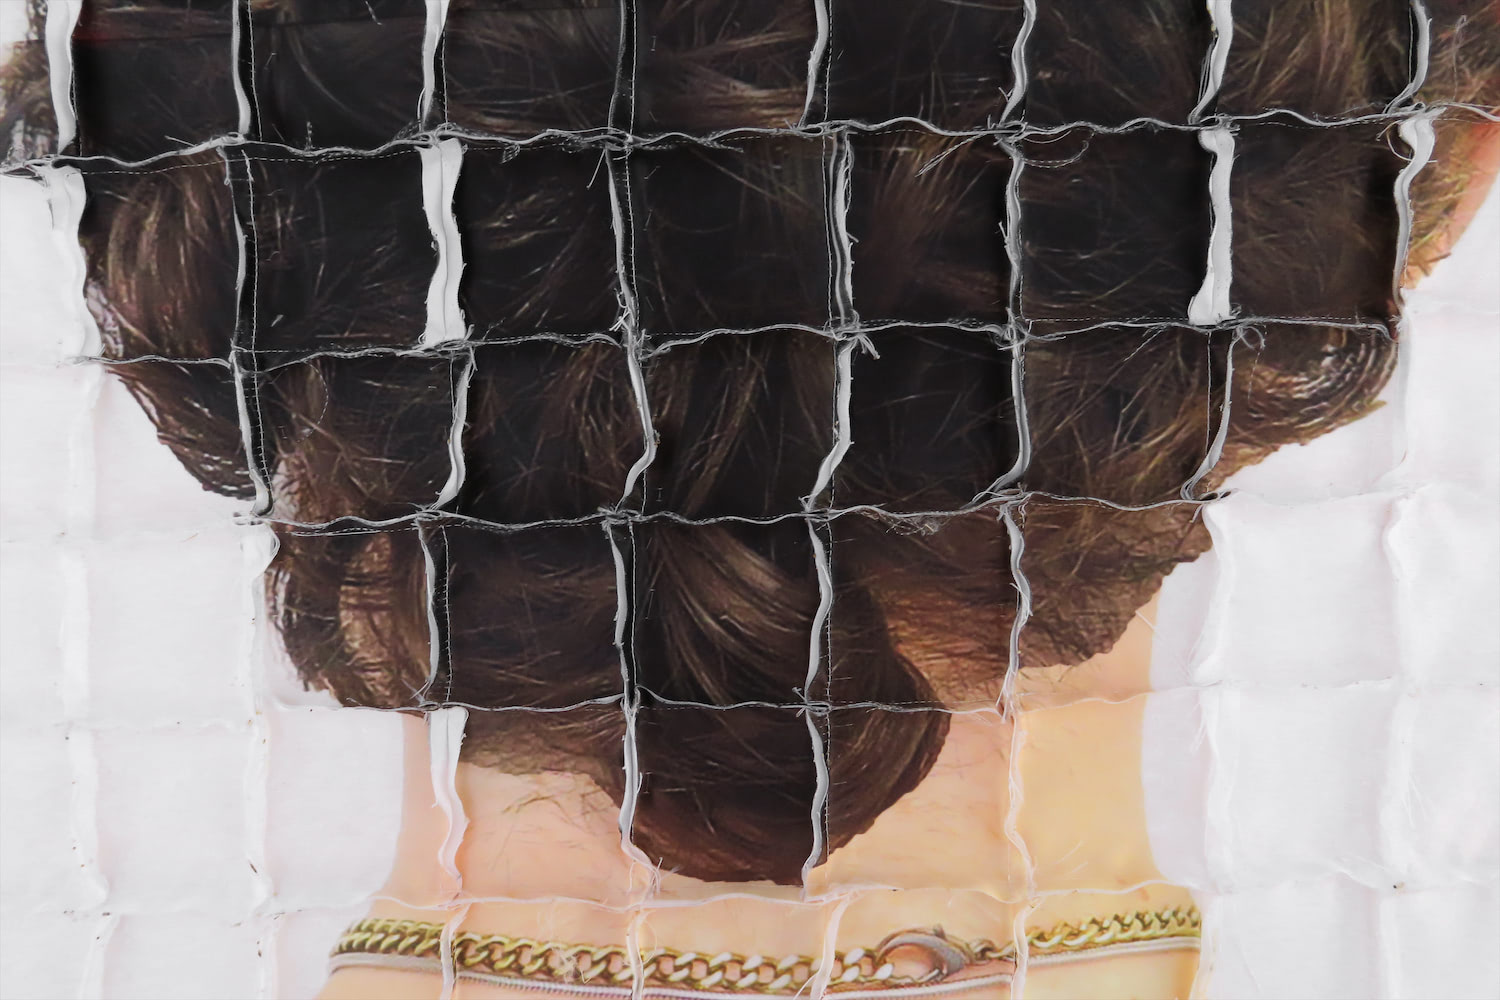 A detail shot of one of the quilts with the just the nape of the neck showing. The  close up of brown-haired curls and a gold chain is distorted by seams that form a grid pattern.